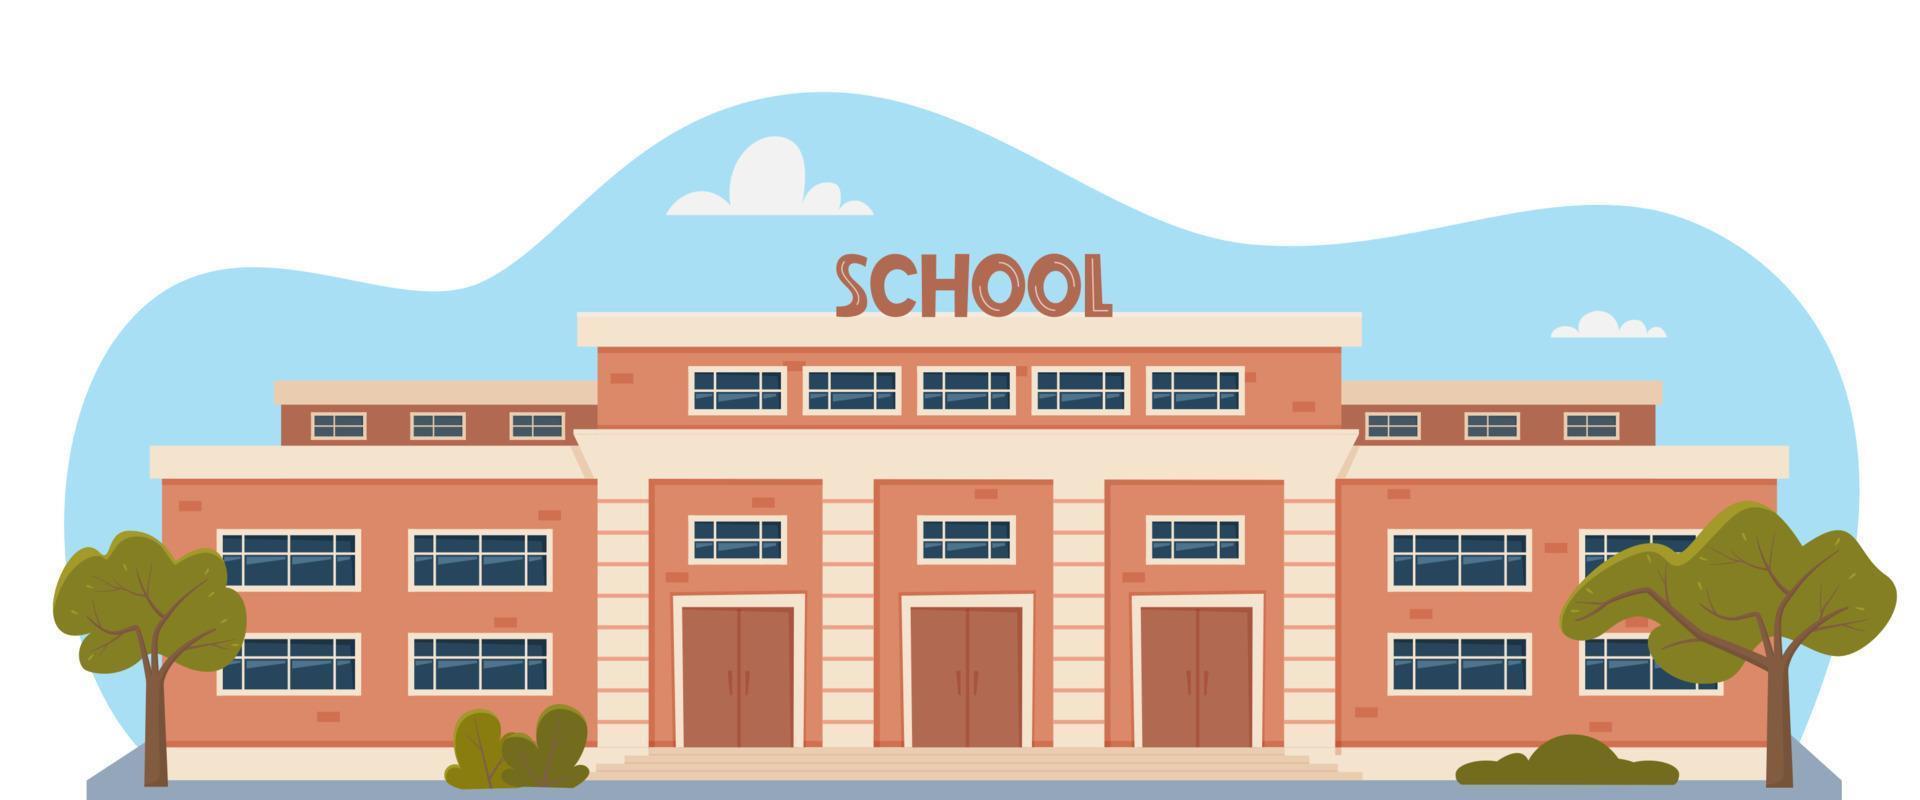 Modern School Building Exterior. Welcome Back To School. Educational architecture, facade of high school building with large windows. Design for flyer, banner, card. Vector illustration.